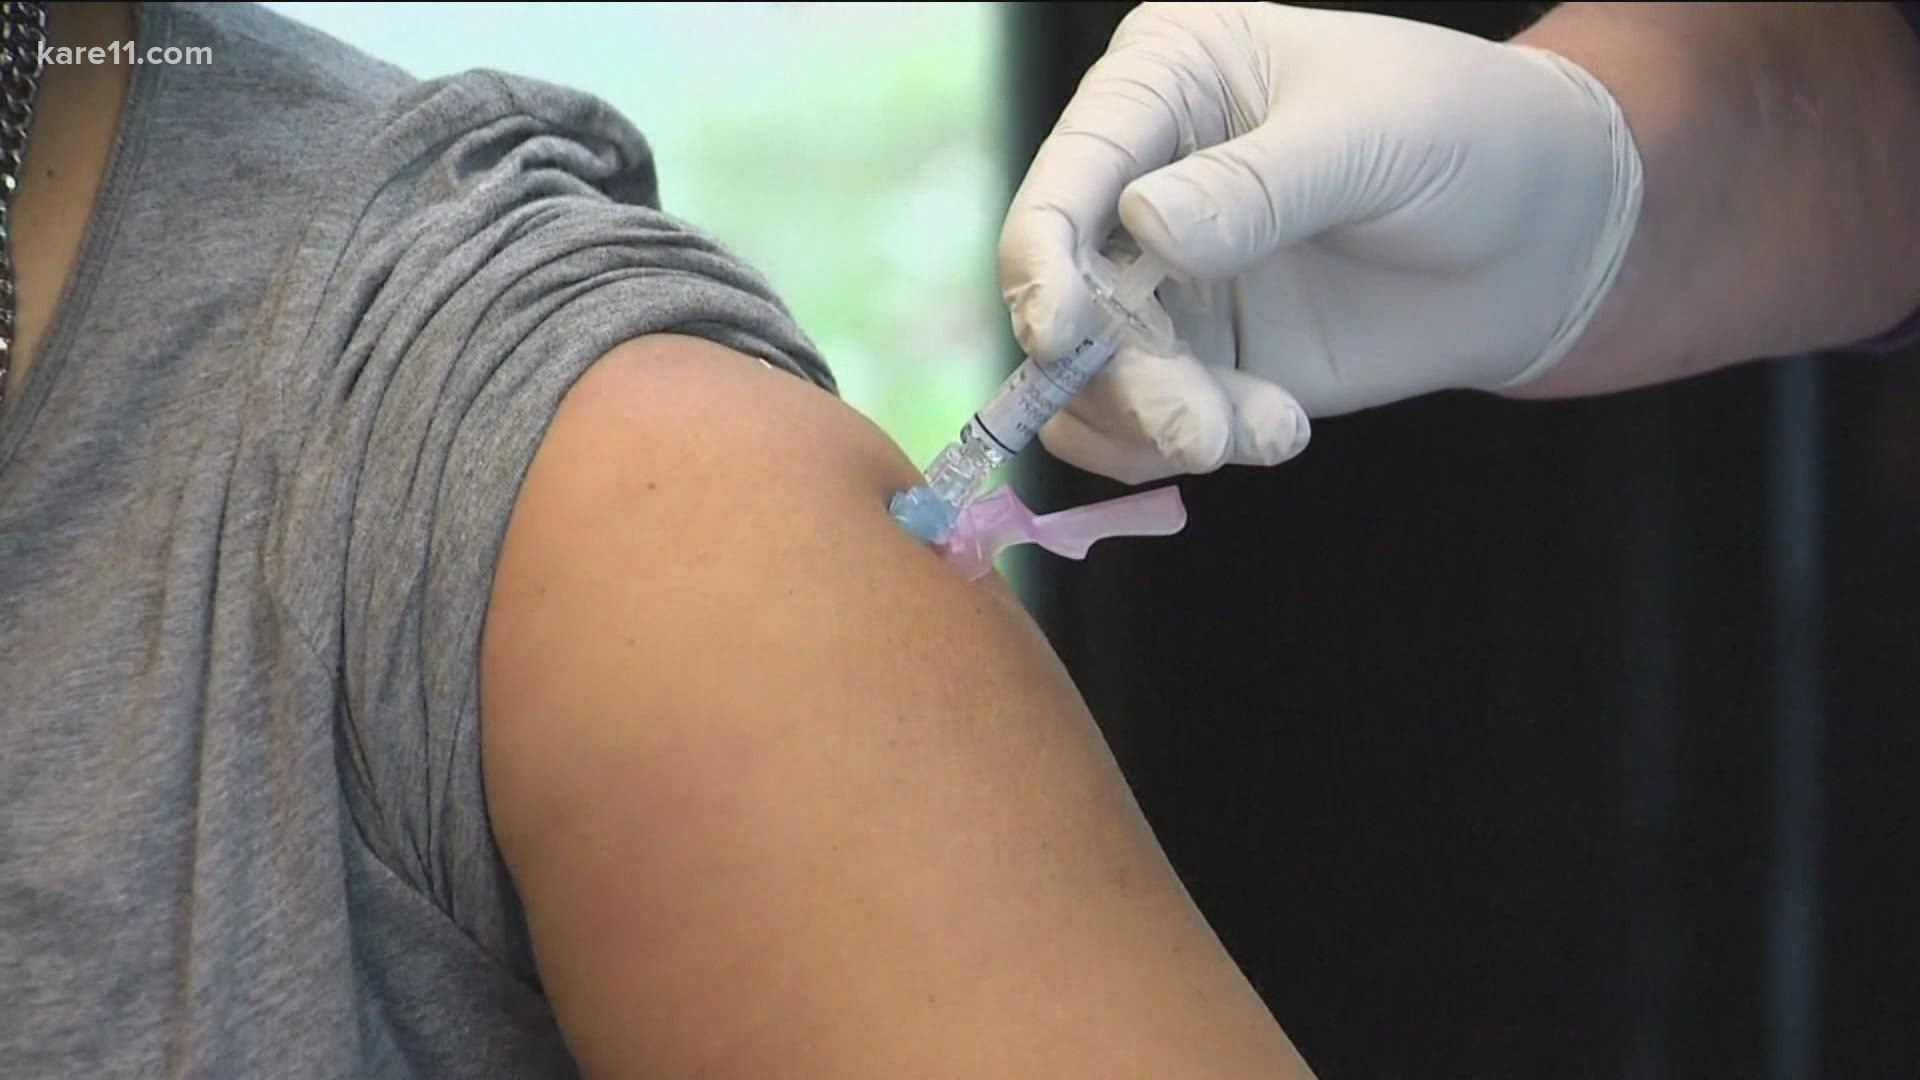 "People really do need to get the vaccine that's available to them as soon as they can," said Dr. Rick Kennedy, co-director of Mayo Clinic's Vaccine Research Group.